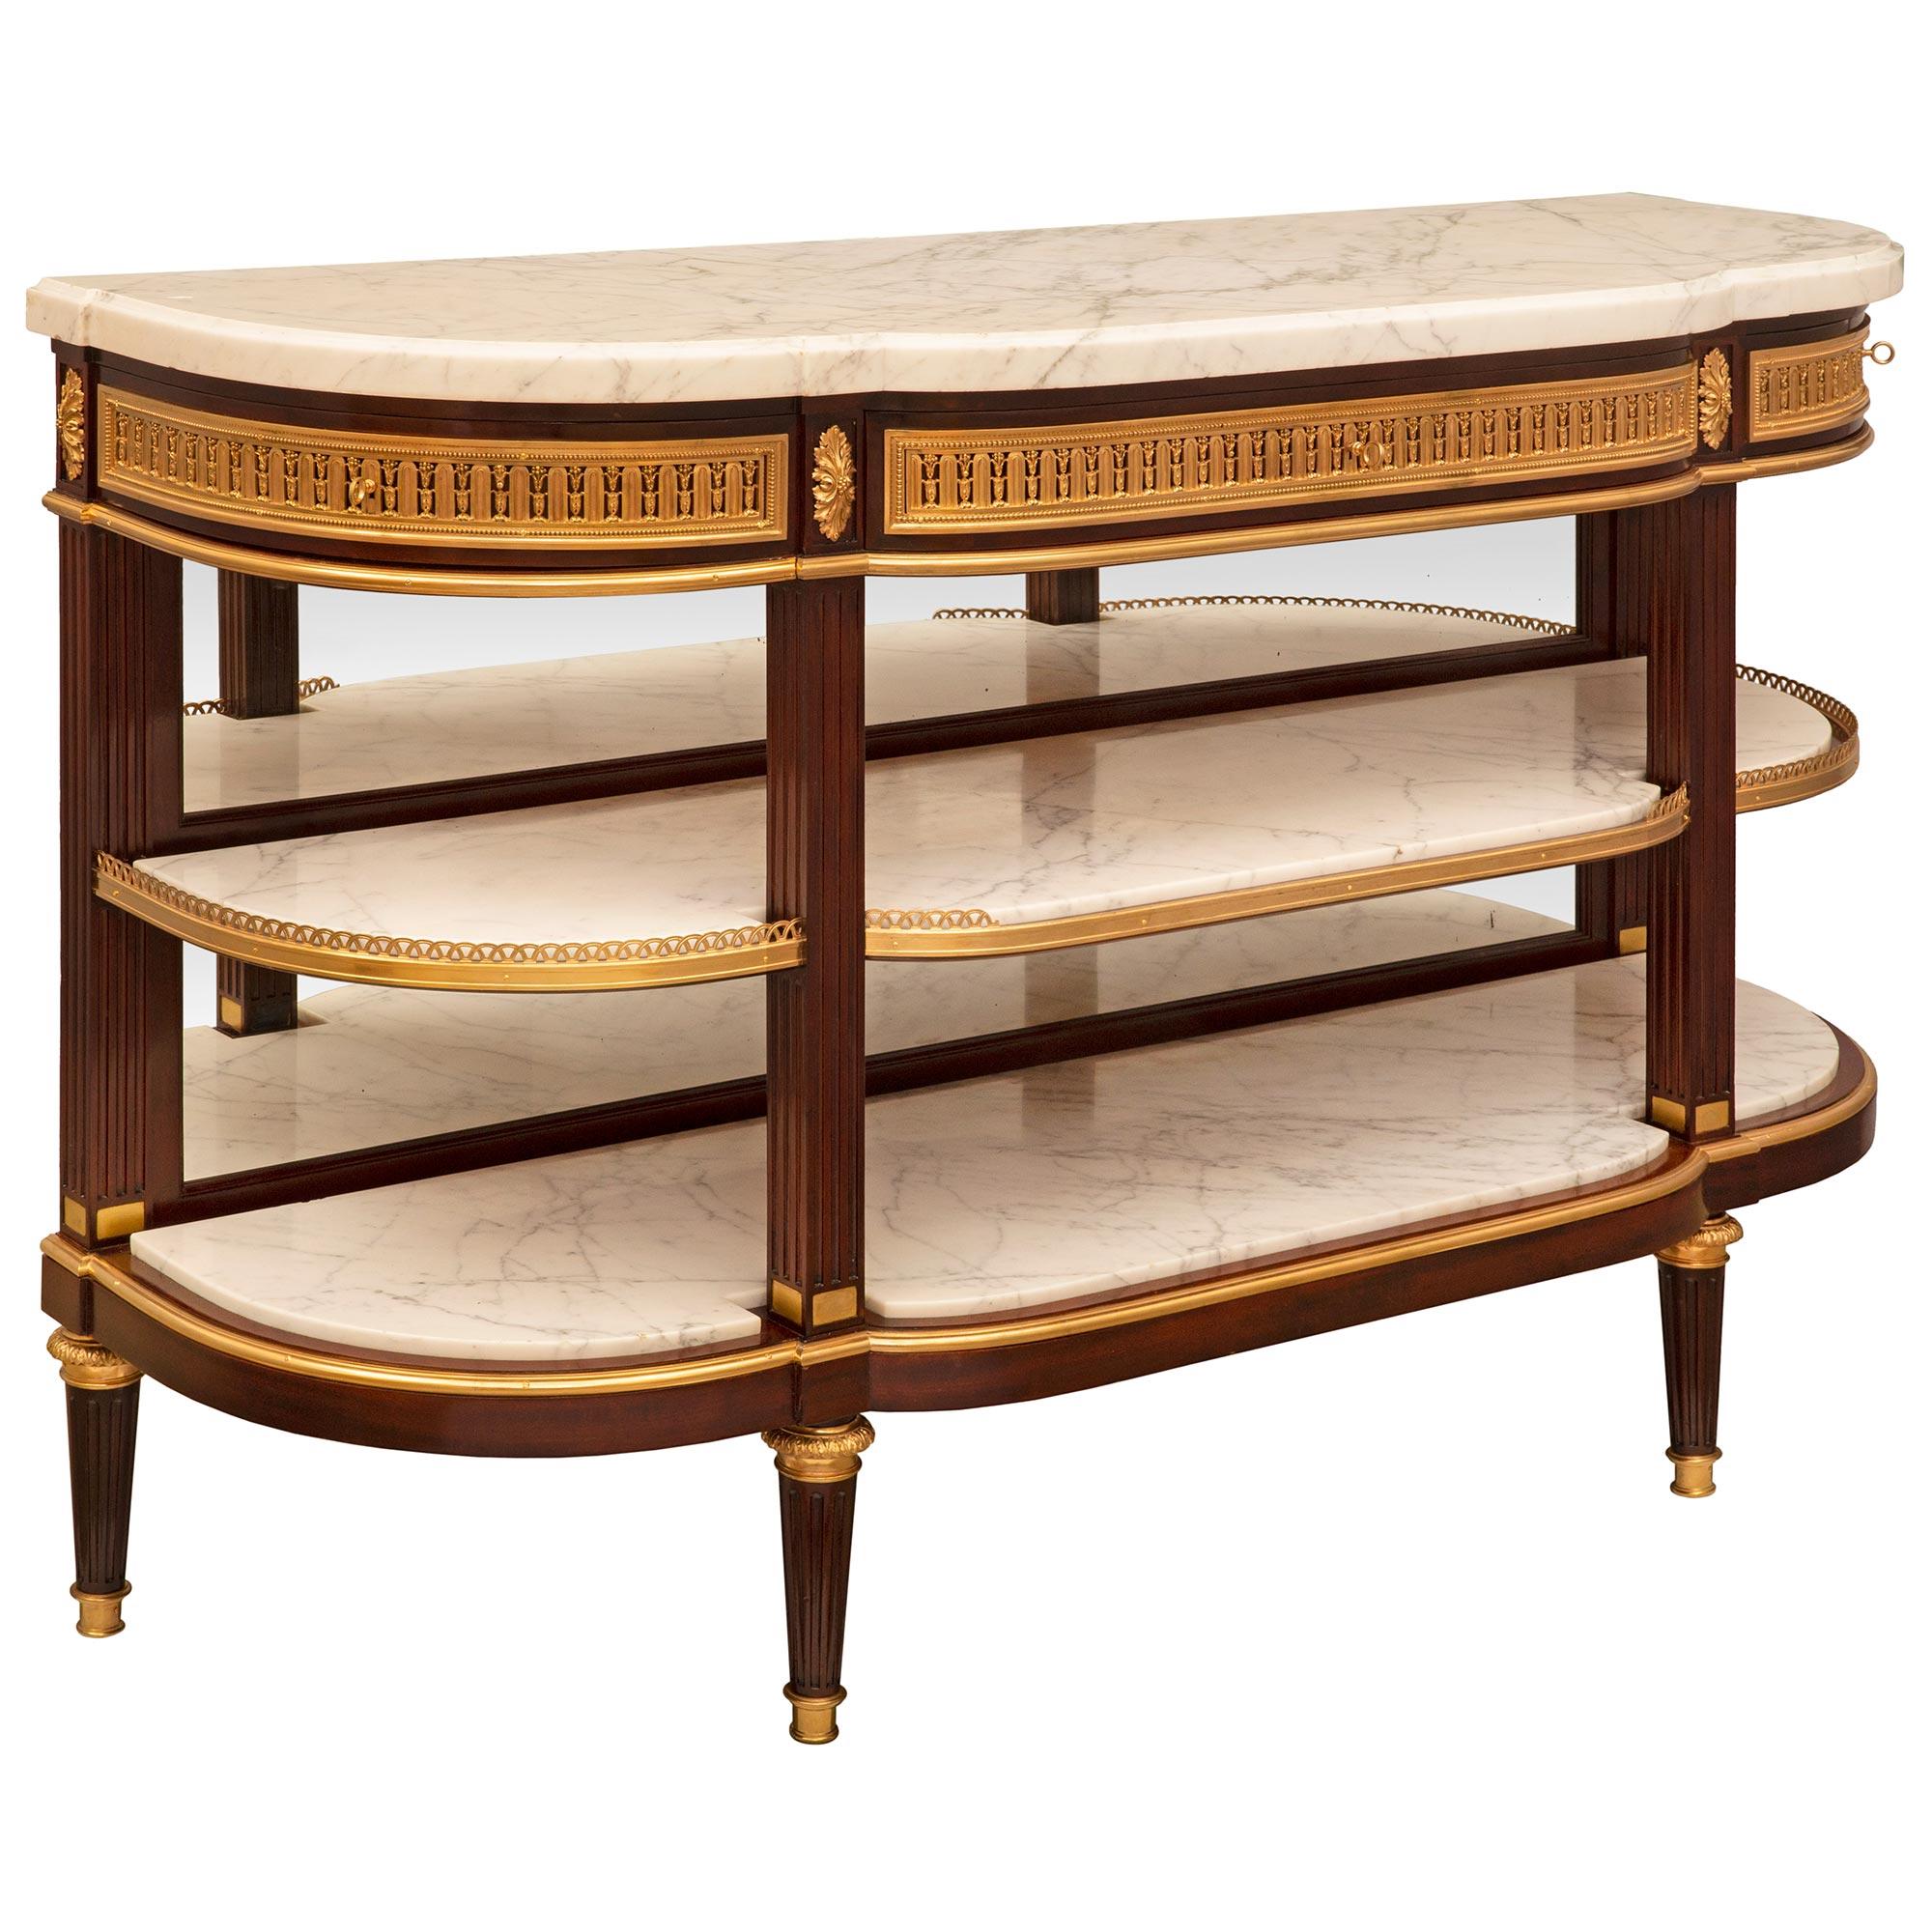 French 19th Century Louis XVI St. Belle Époque Period Mahogany & Marble Console In Good Condition For Sale In West Palm Beach, FL